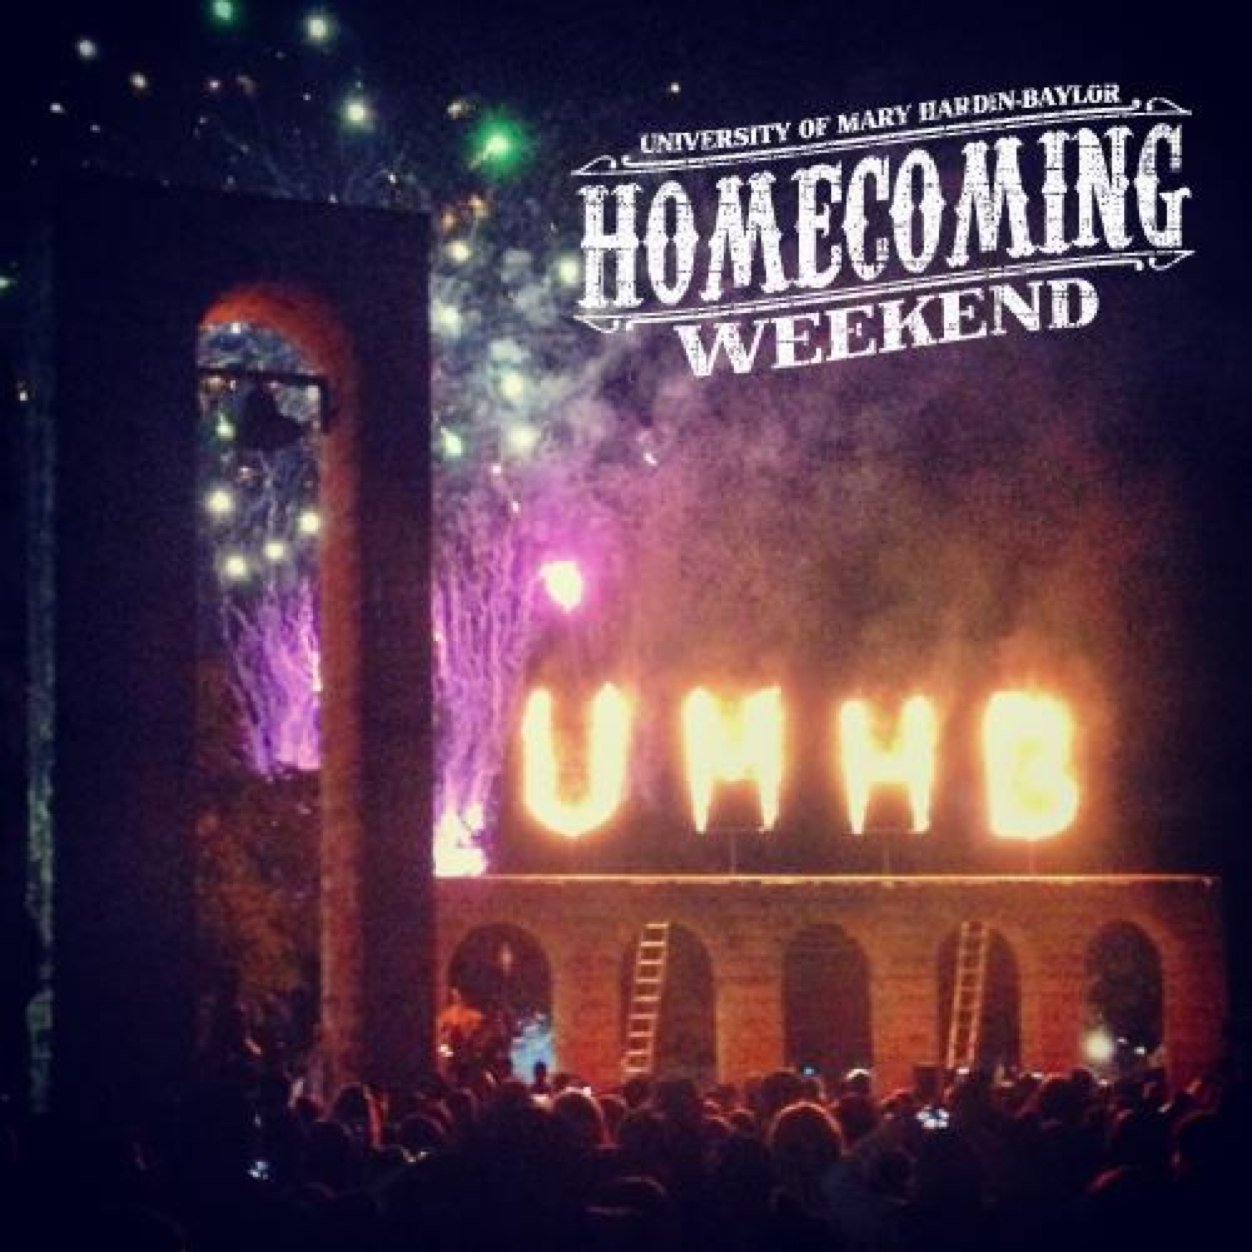 This is the official UMHB Homecoming 2014 account! Follow for updates, free giveaways, and info! 
#umhbhoco14